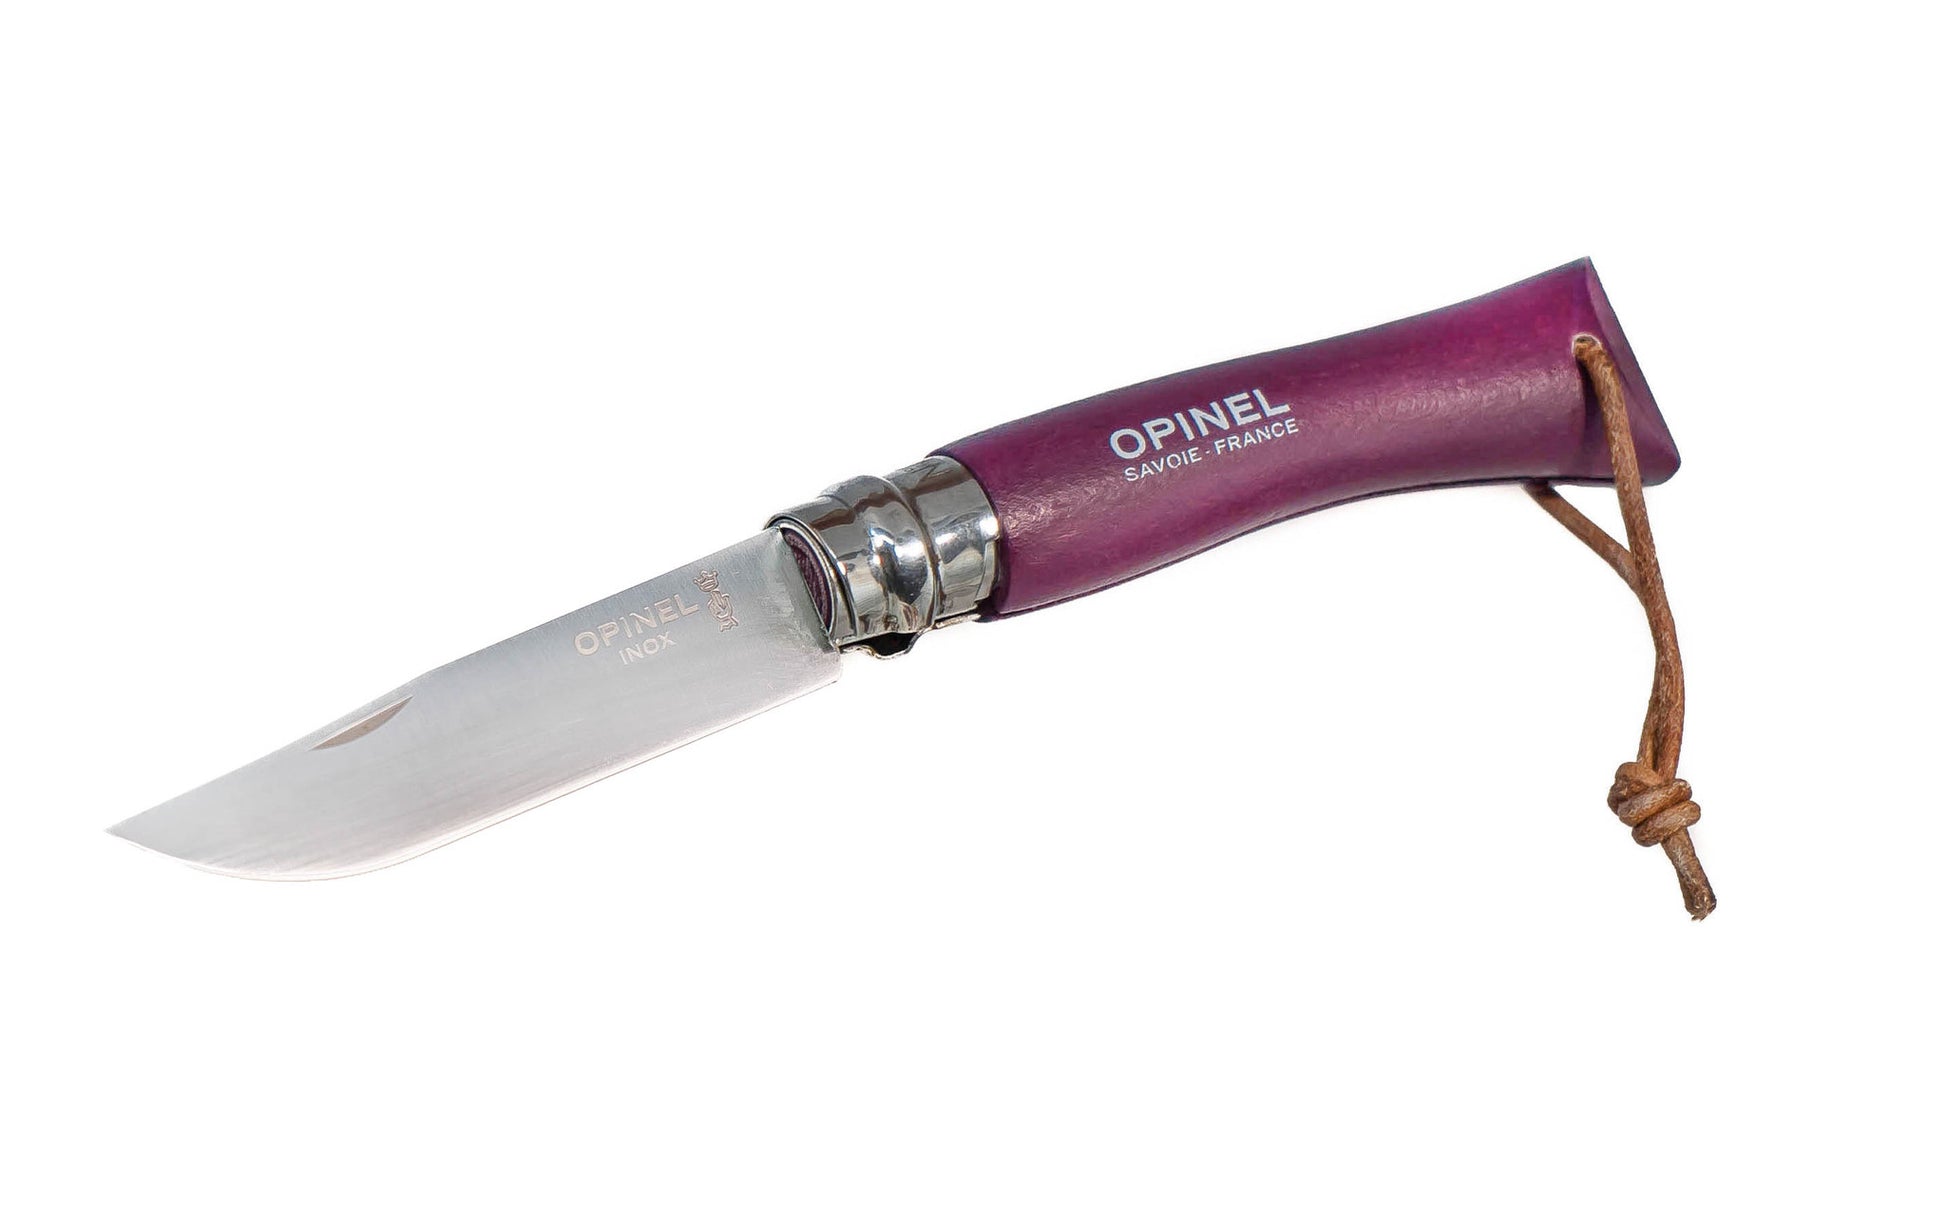 Opinel Stainless Steel Trekking Knife ~ "Plum" Color ~ Made in France ~ 3-3/16" long foldable blade with stainless locking collar ~ Made of 12c27 Sandvik stainless steel ~ Painted Beechwood handle with leather loop